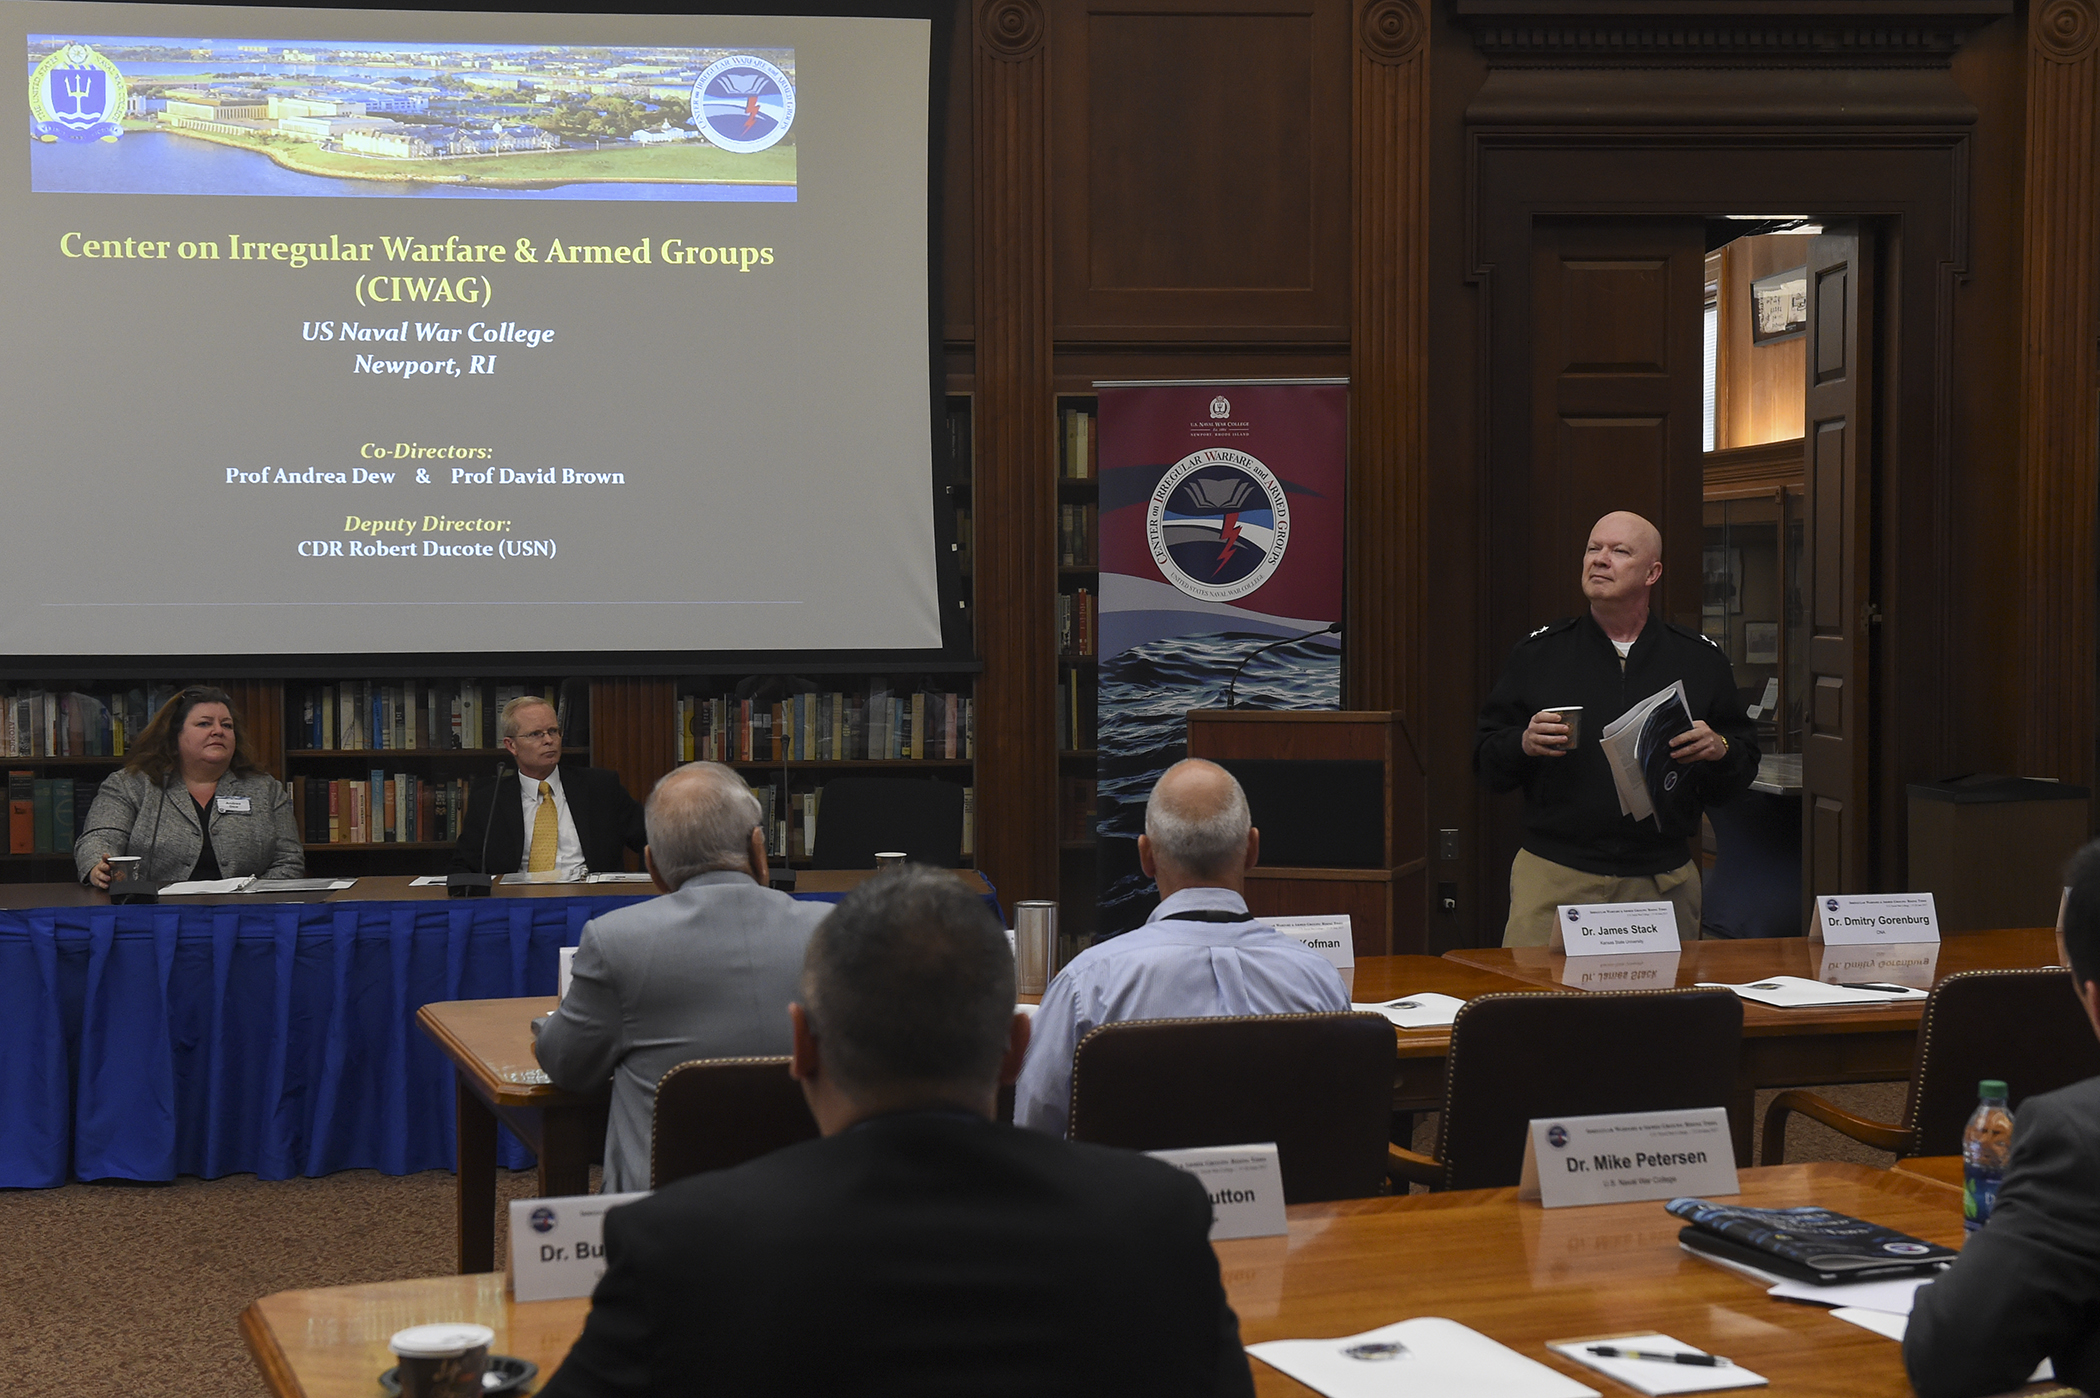 U.S. Naval War College President Rear Adm. Jeffrey Harley addresses a symposium hosted by the Center for Irregular Warfare and Armed Groups (CIWAG) at the school in Newport, Rhode Island.